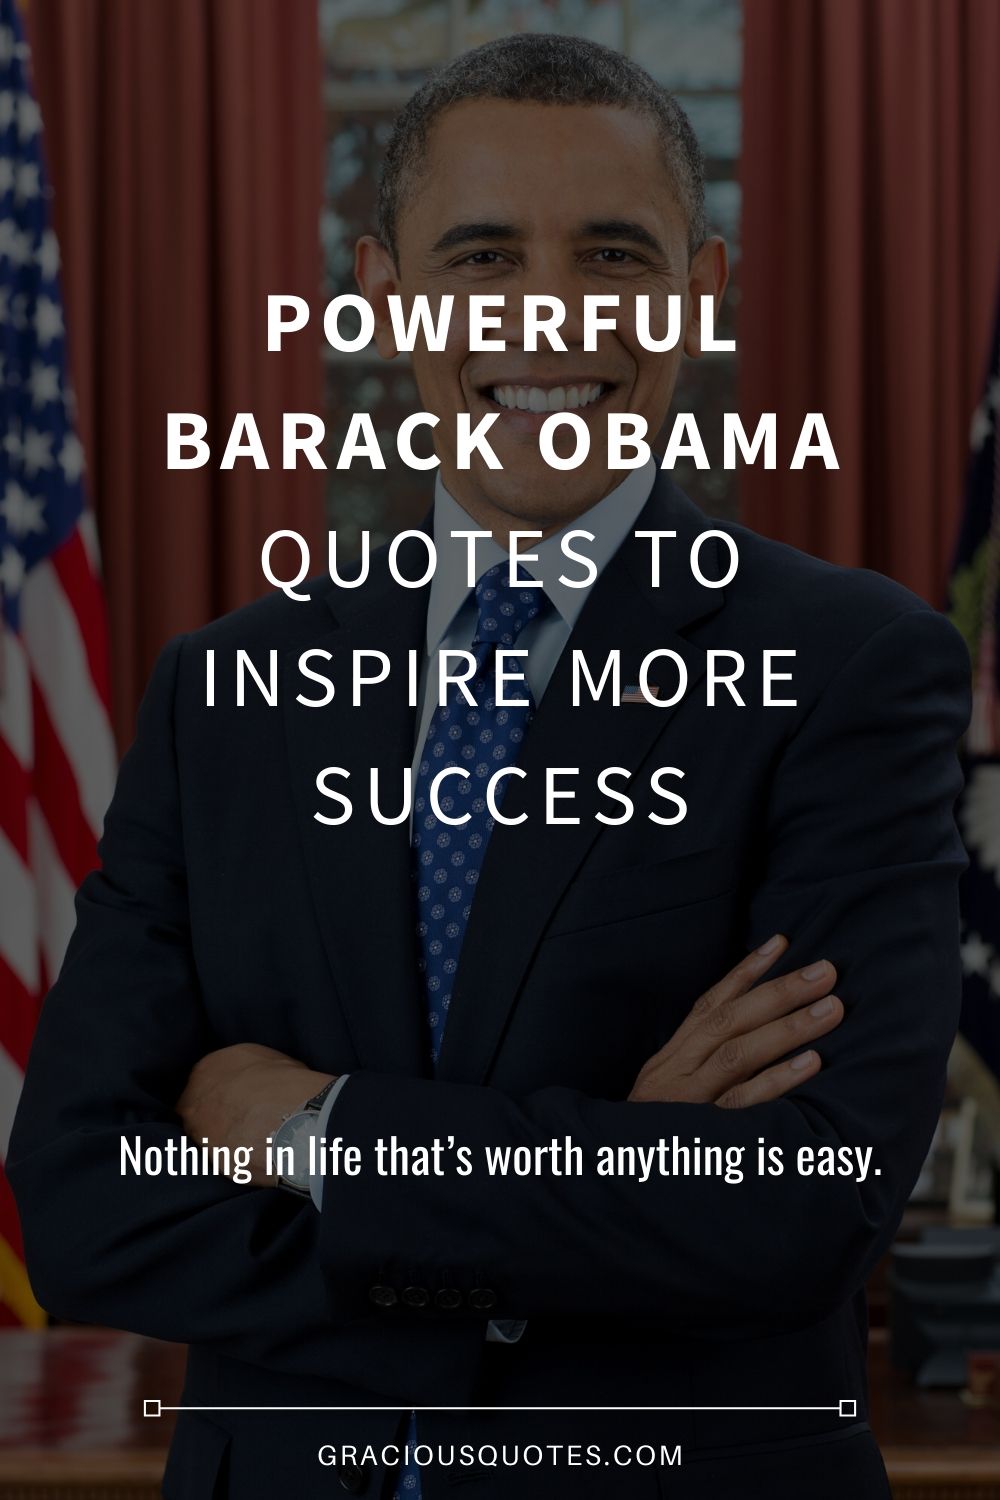 Powerful-Barack-Obama-Quotes-to-Inspire-more-success-Gracious-Quotes